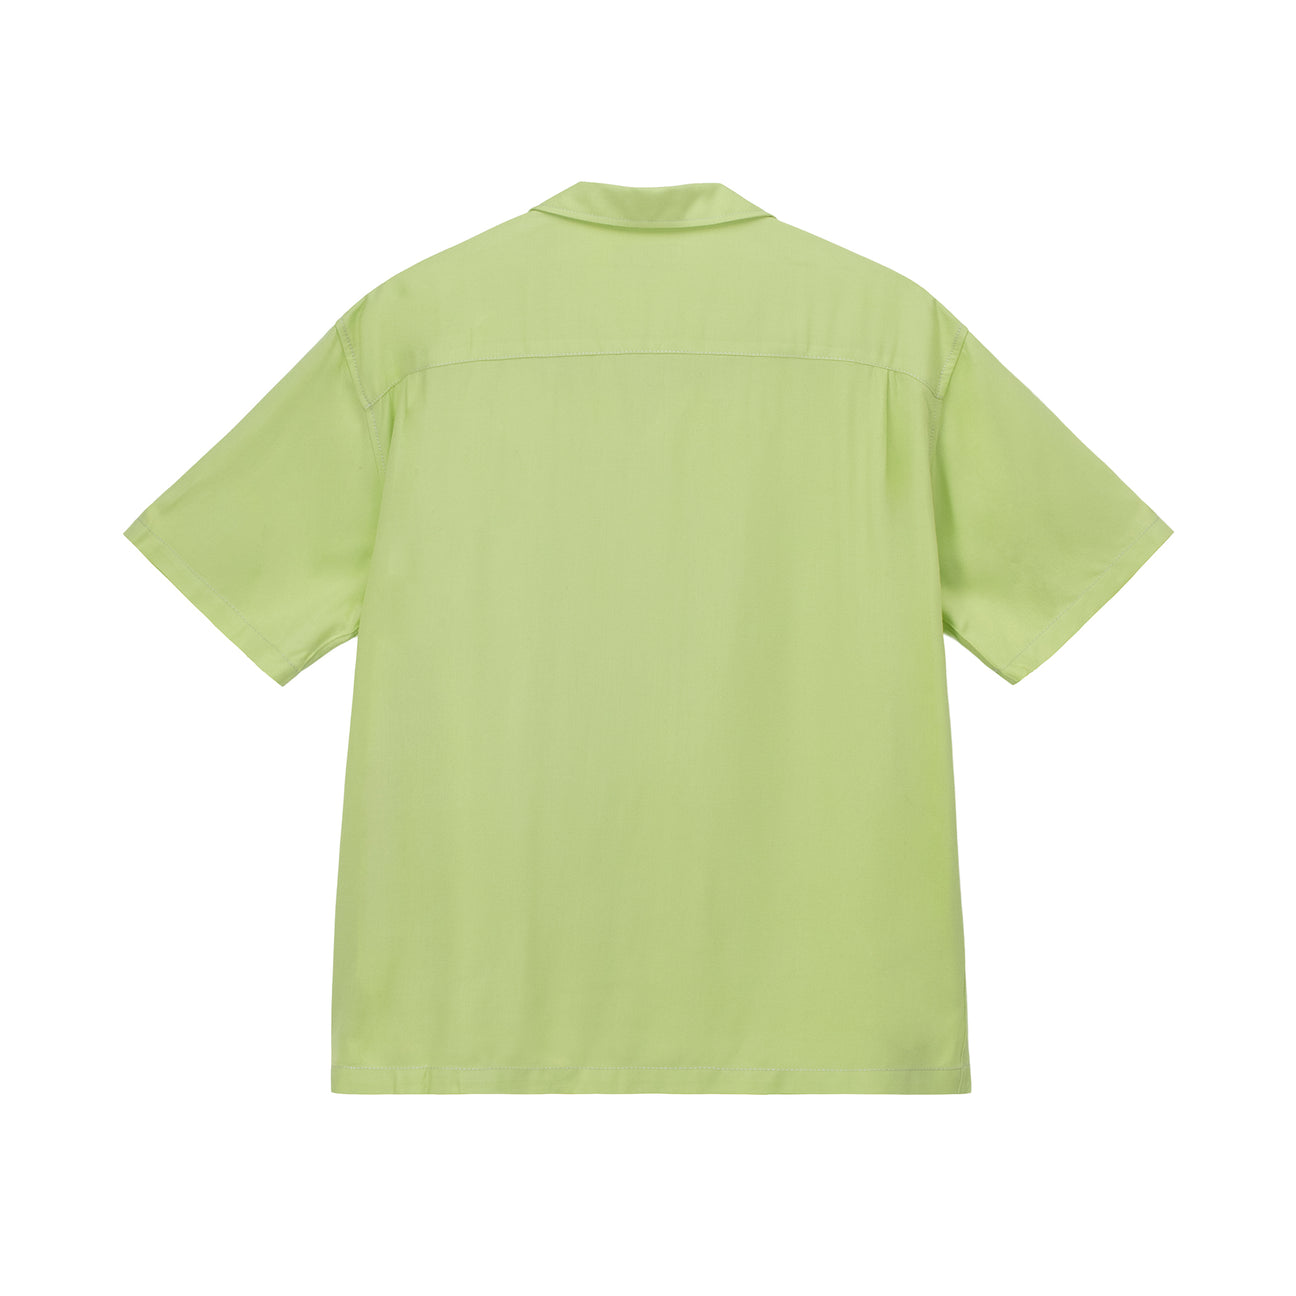 Contrast Pick Stitched Shirt Lime